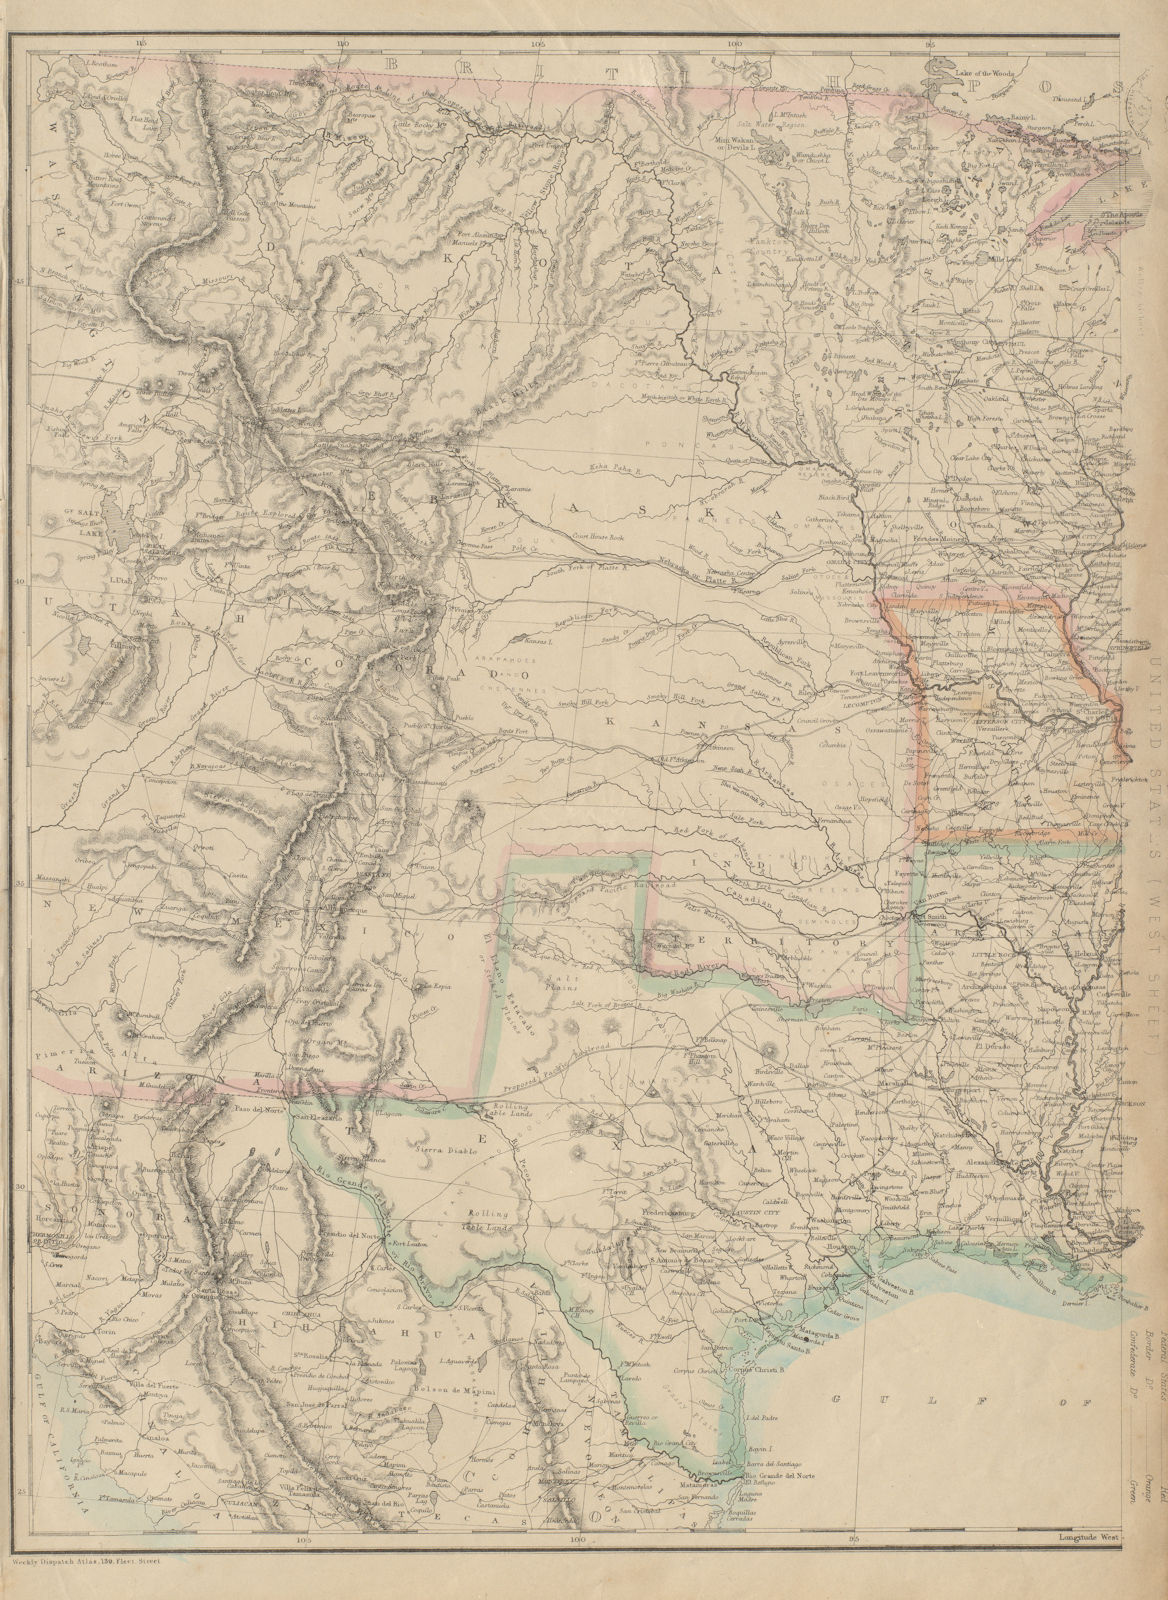 Associate Product CENTRAL CIVIL WAR USA. Union & Confederate states Texas. ETTLING 1863 old map